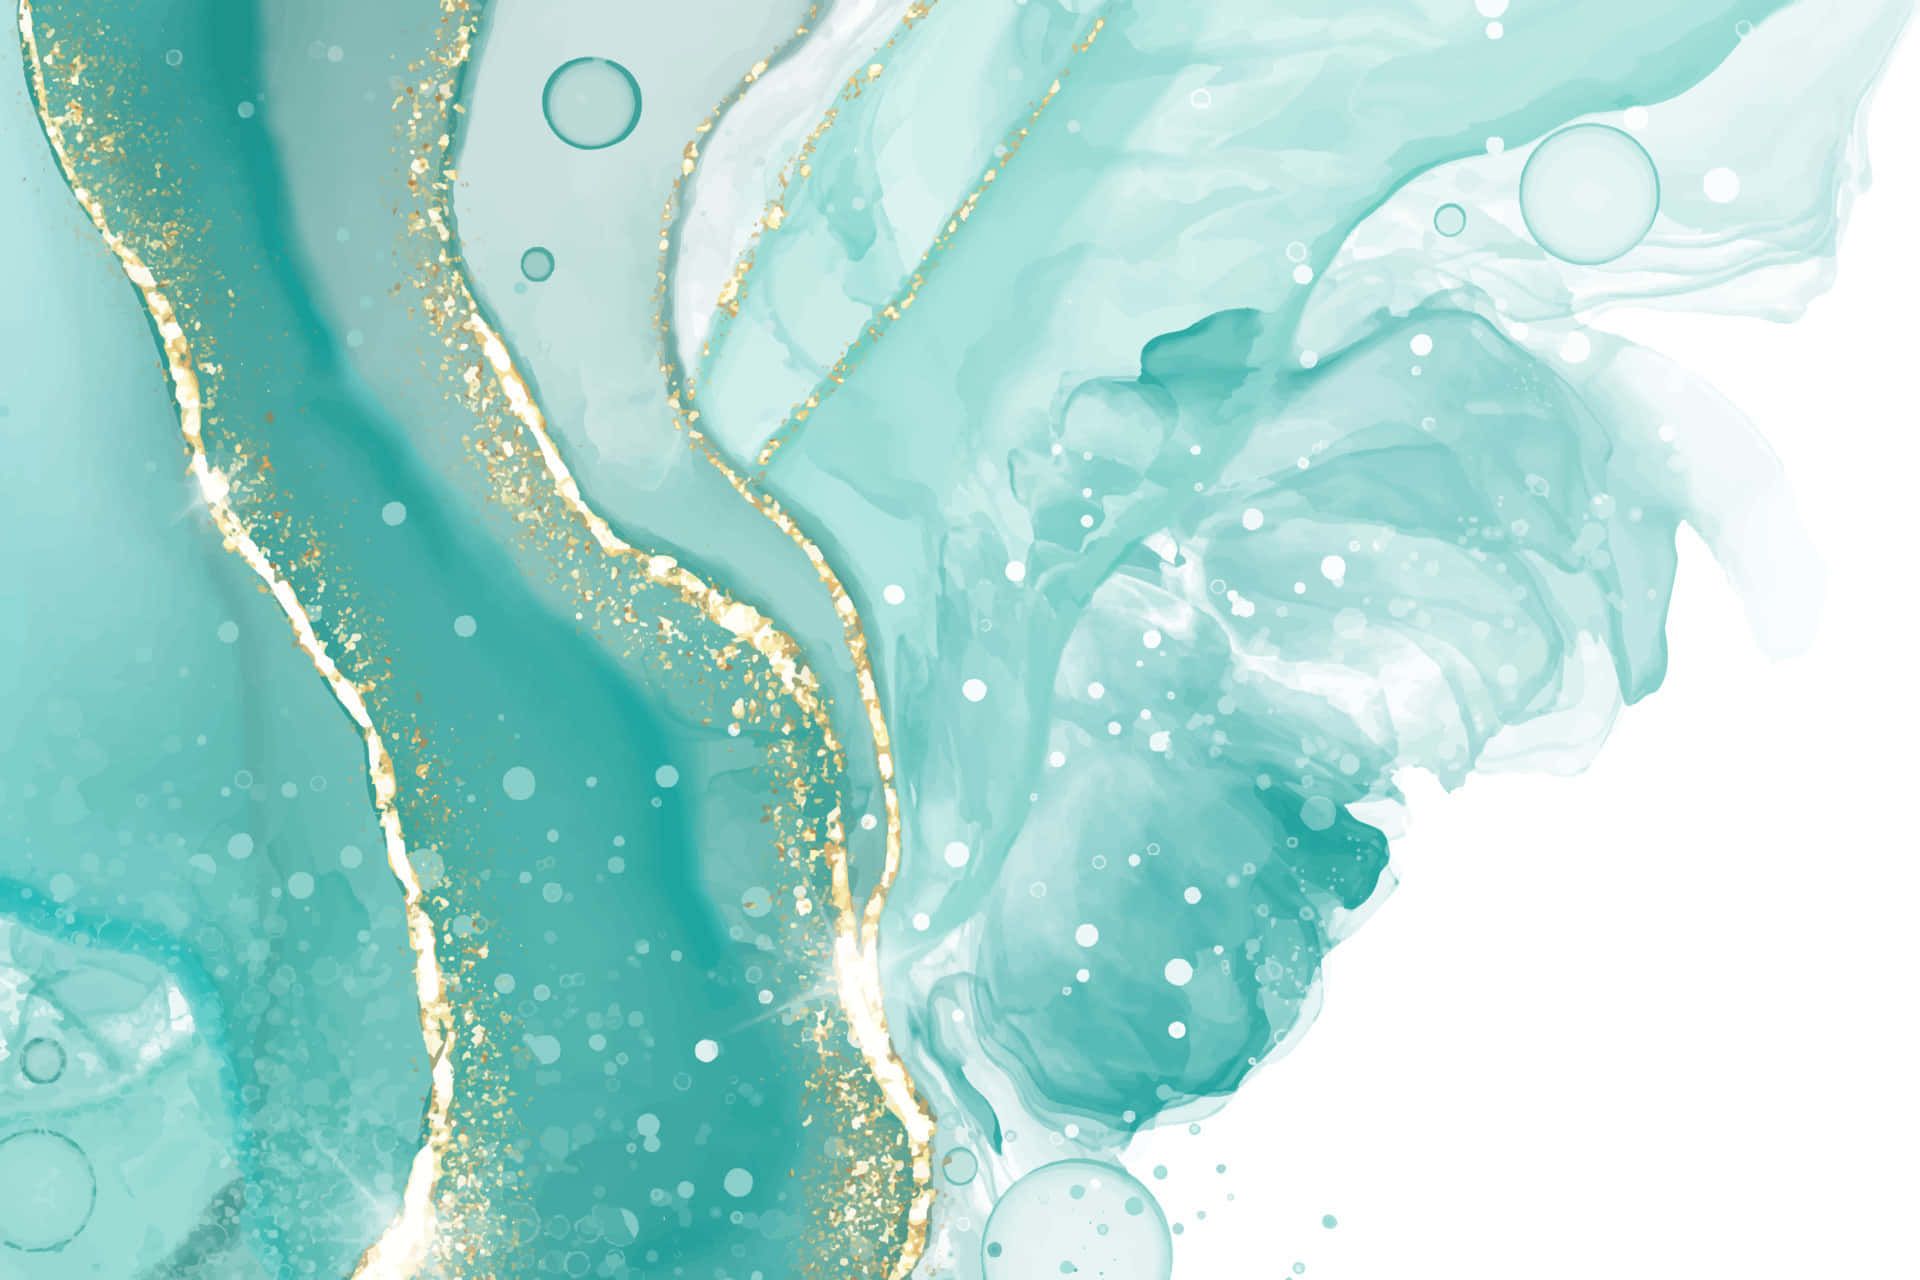 A digital painting of a teal and gold abstract painting - Teal, aqua